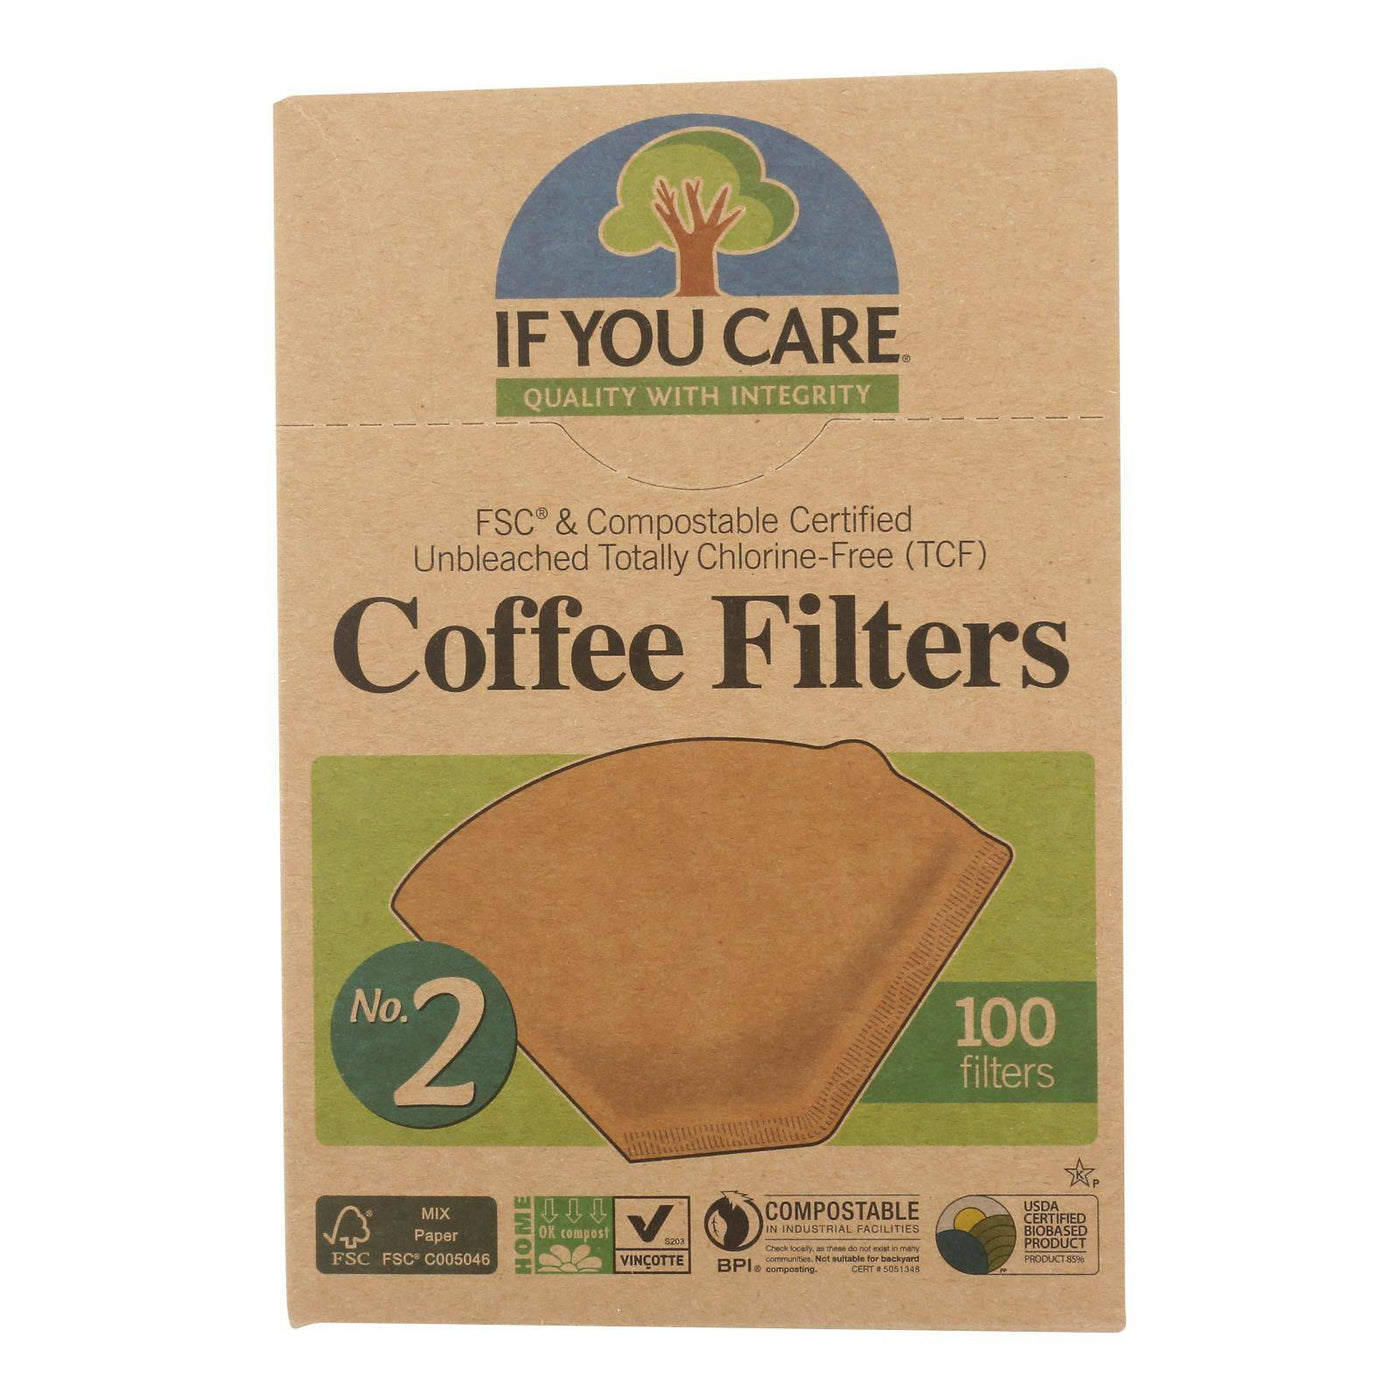 If You Care Coffee Filters Lbs.2 Cone - Case Of 12 - 100 Count | OnlyNaturals.us